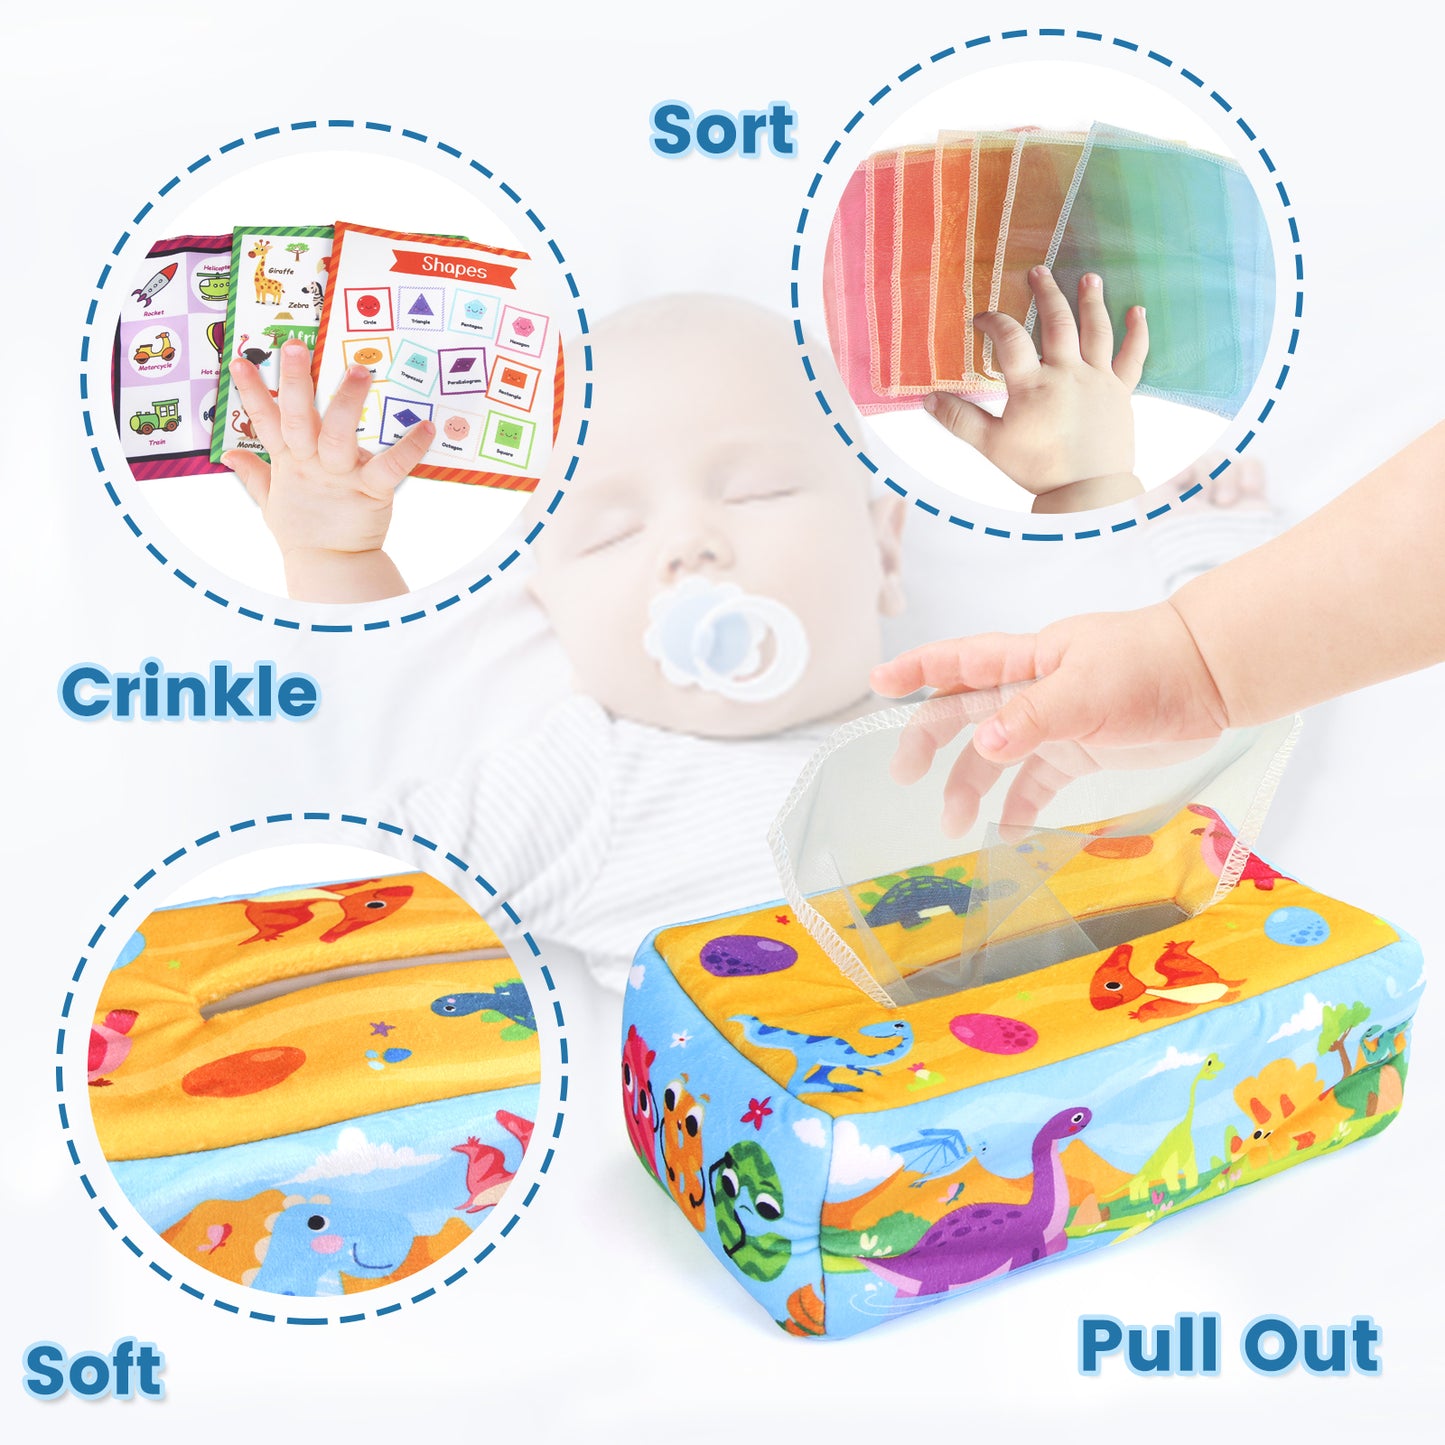 Joyfia Tissue Box Toy, Montessori Toys for Babies 0-12 Months, Soft High Contrast Crinkle Cloth Sensory Toys, Toddlers Infants Early Learning Developmental Gifts for 1+ Year Old Boys Girls Kids